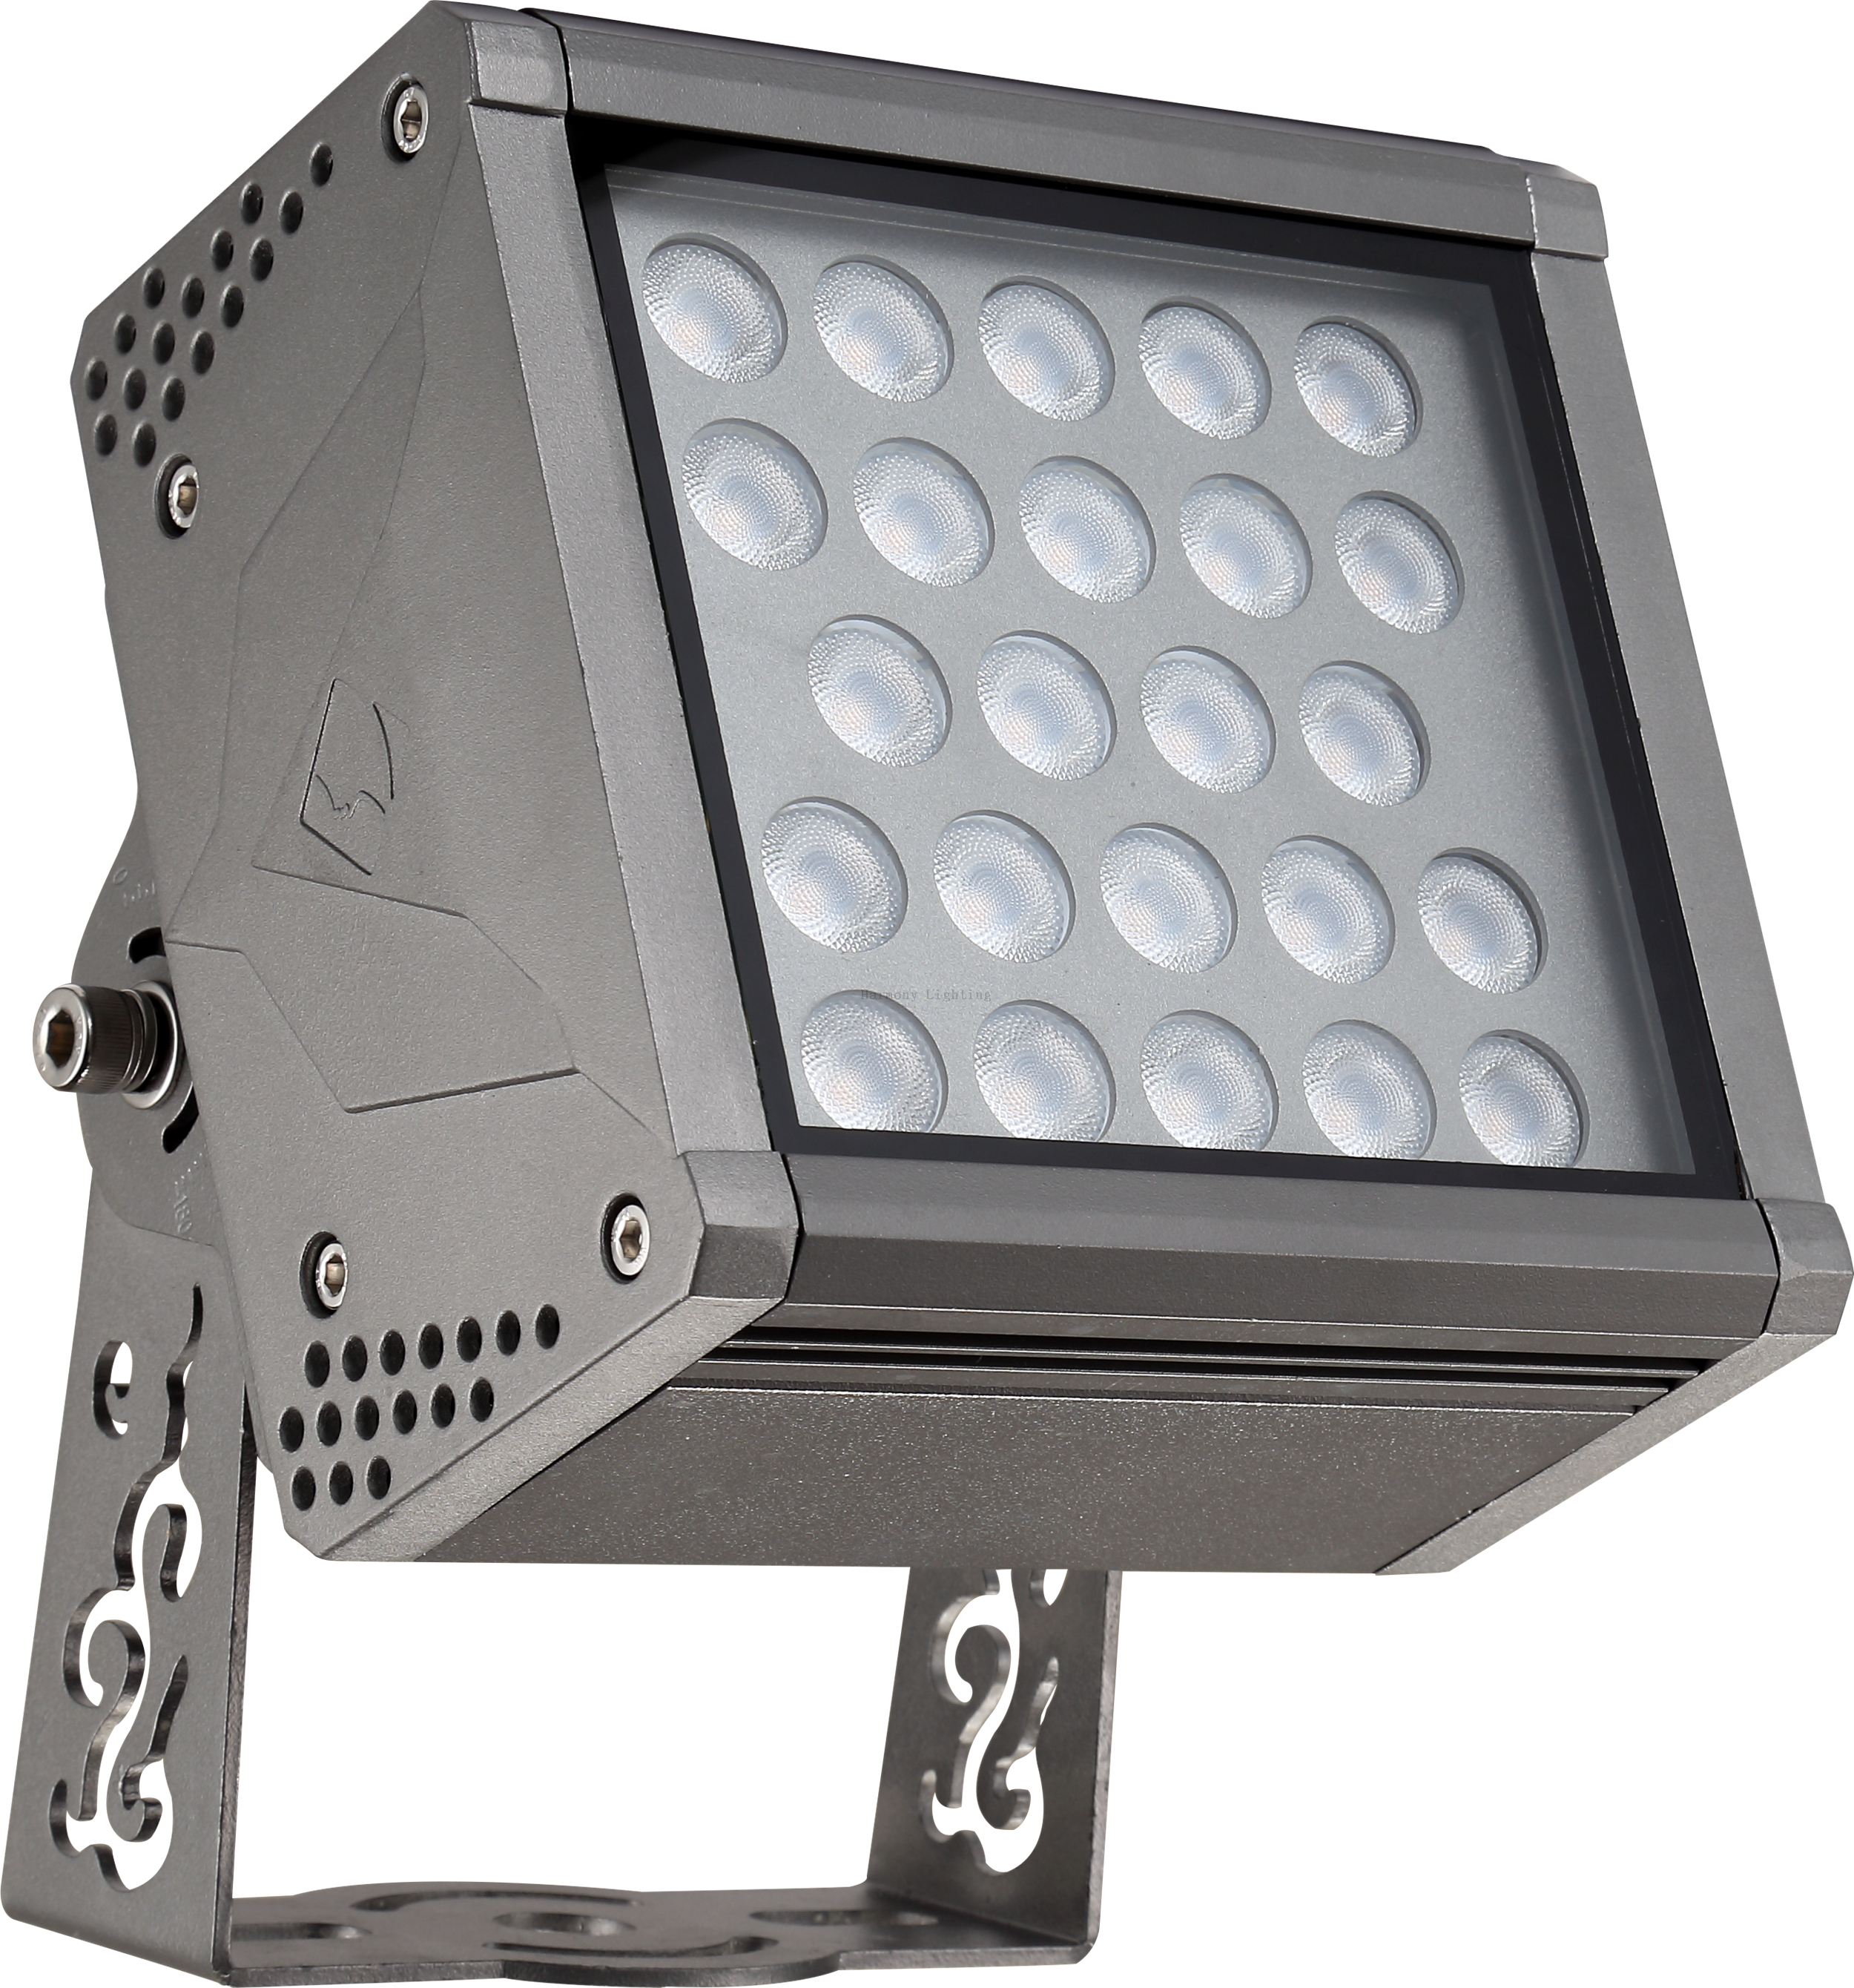 RH-P10A Architectural Floodlighting IP66 CE AC110 AC220 DC24 81W CREE LED High Brightness Waterproof Outdoor Project Flood Lamp